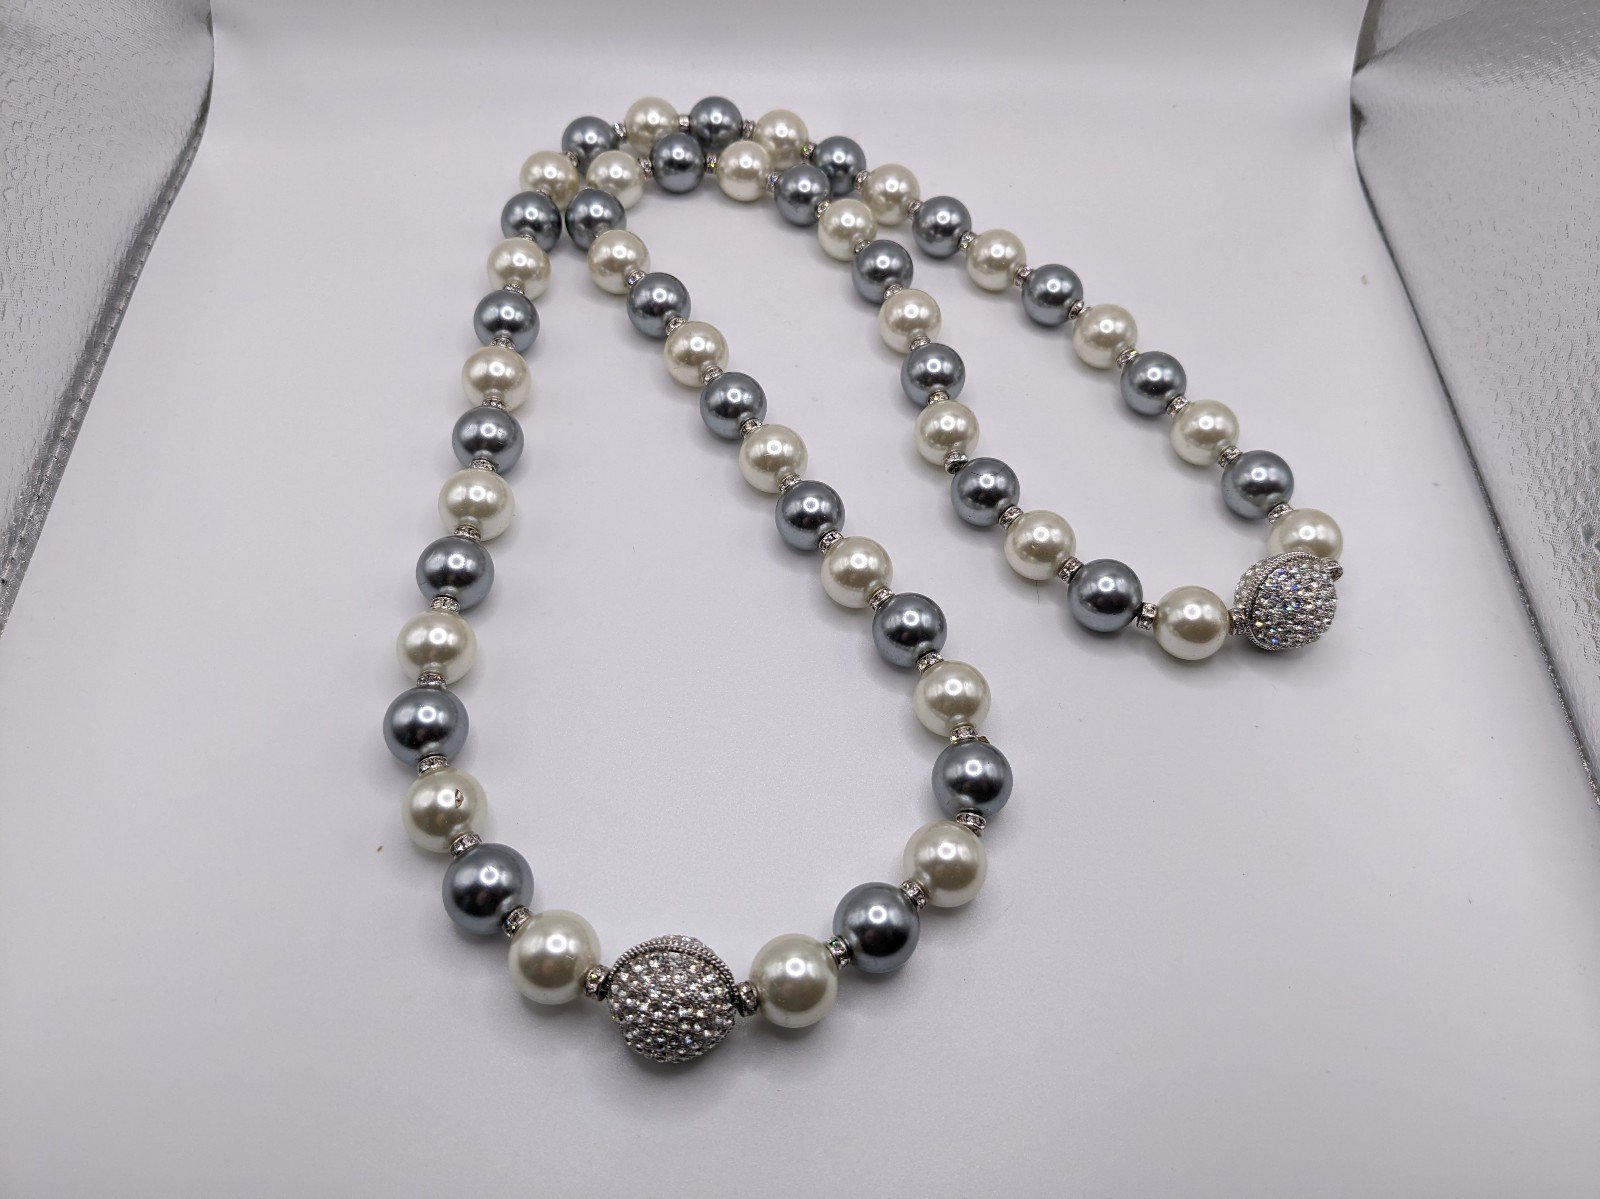 Avon Faux White and Gray Pearl Statement Necklace 97o1dyBe4